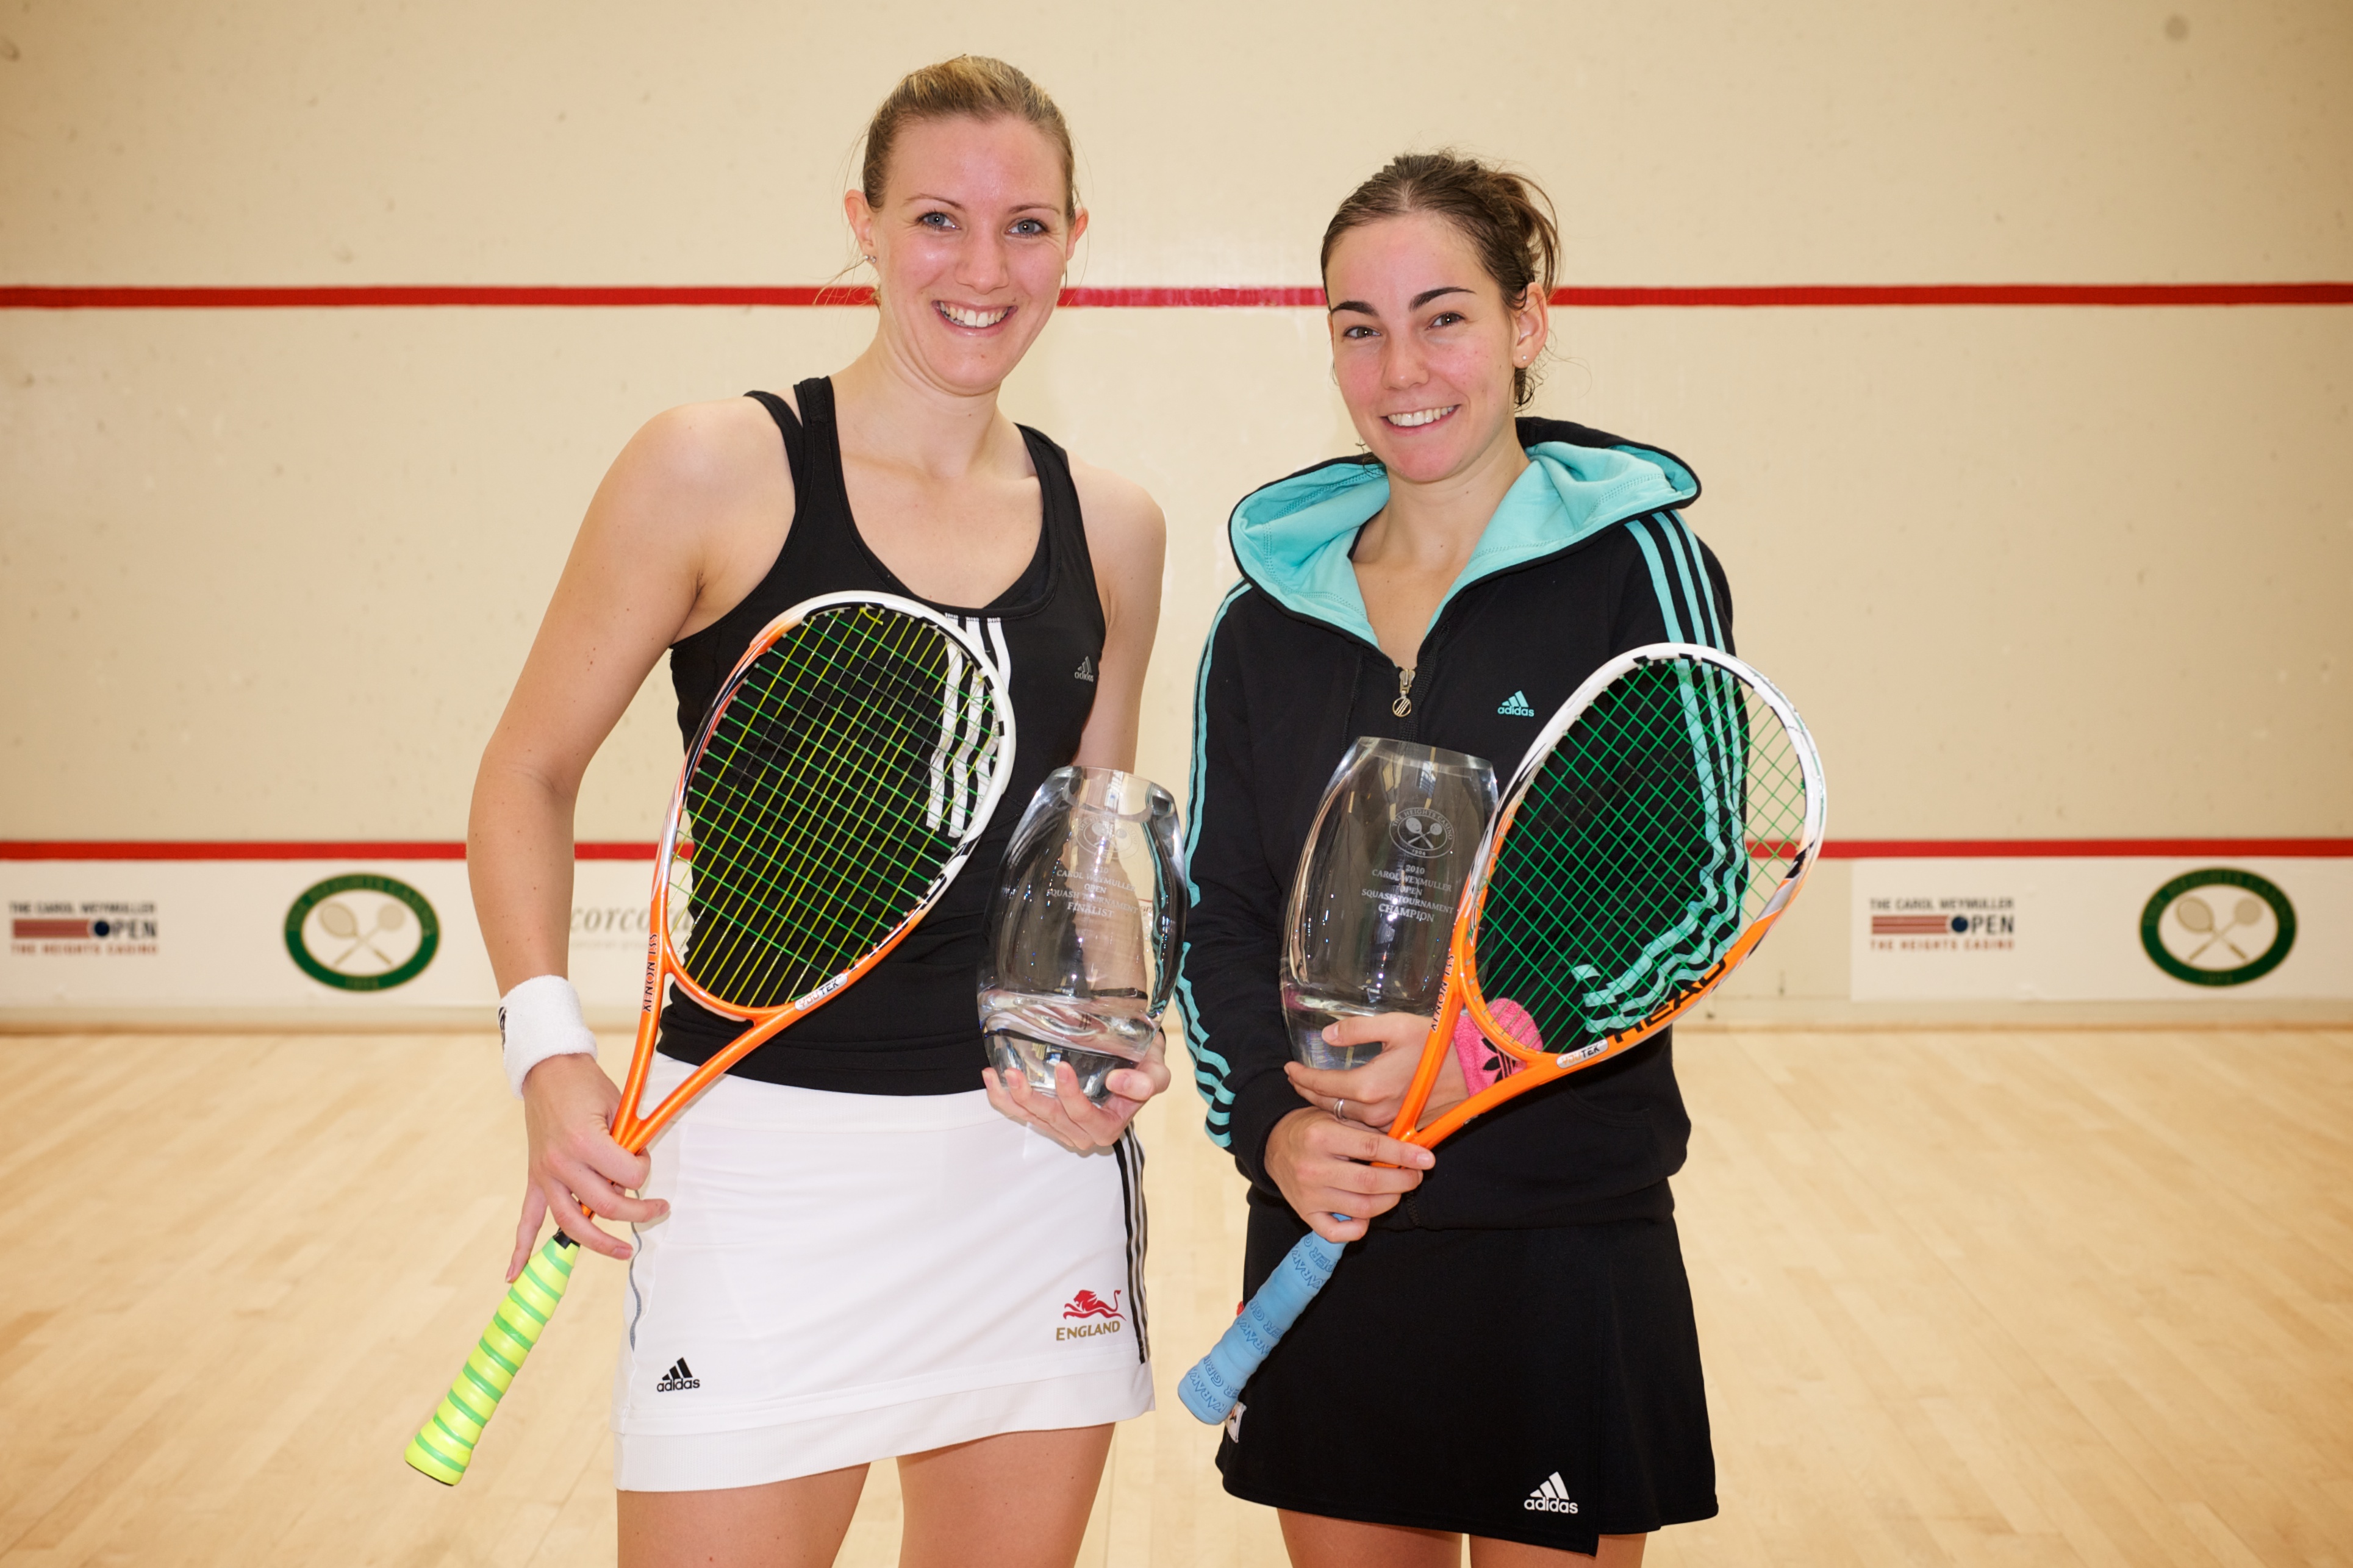 Teammates on England's World Team, Laura Massaro (L) and Jenny Duncalf both survived five-game marathons in the semifinals. But Duncalf dominated the final as Massaro was out of gas. For Duncalf, the 2010 Weymuller was a repeat performance of her title run last year.